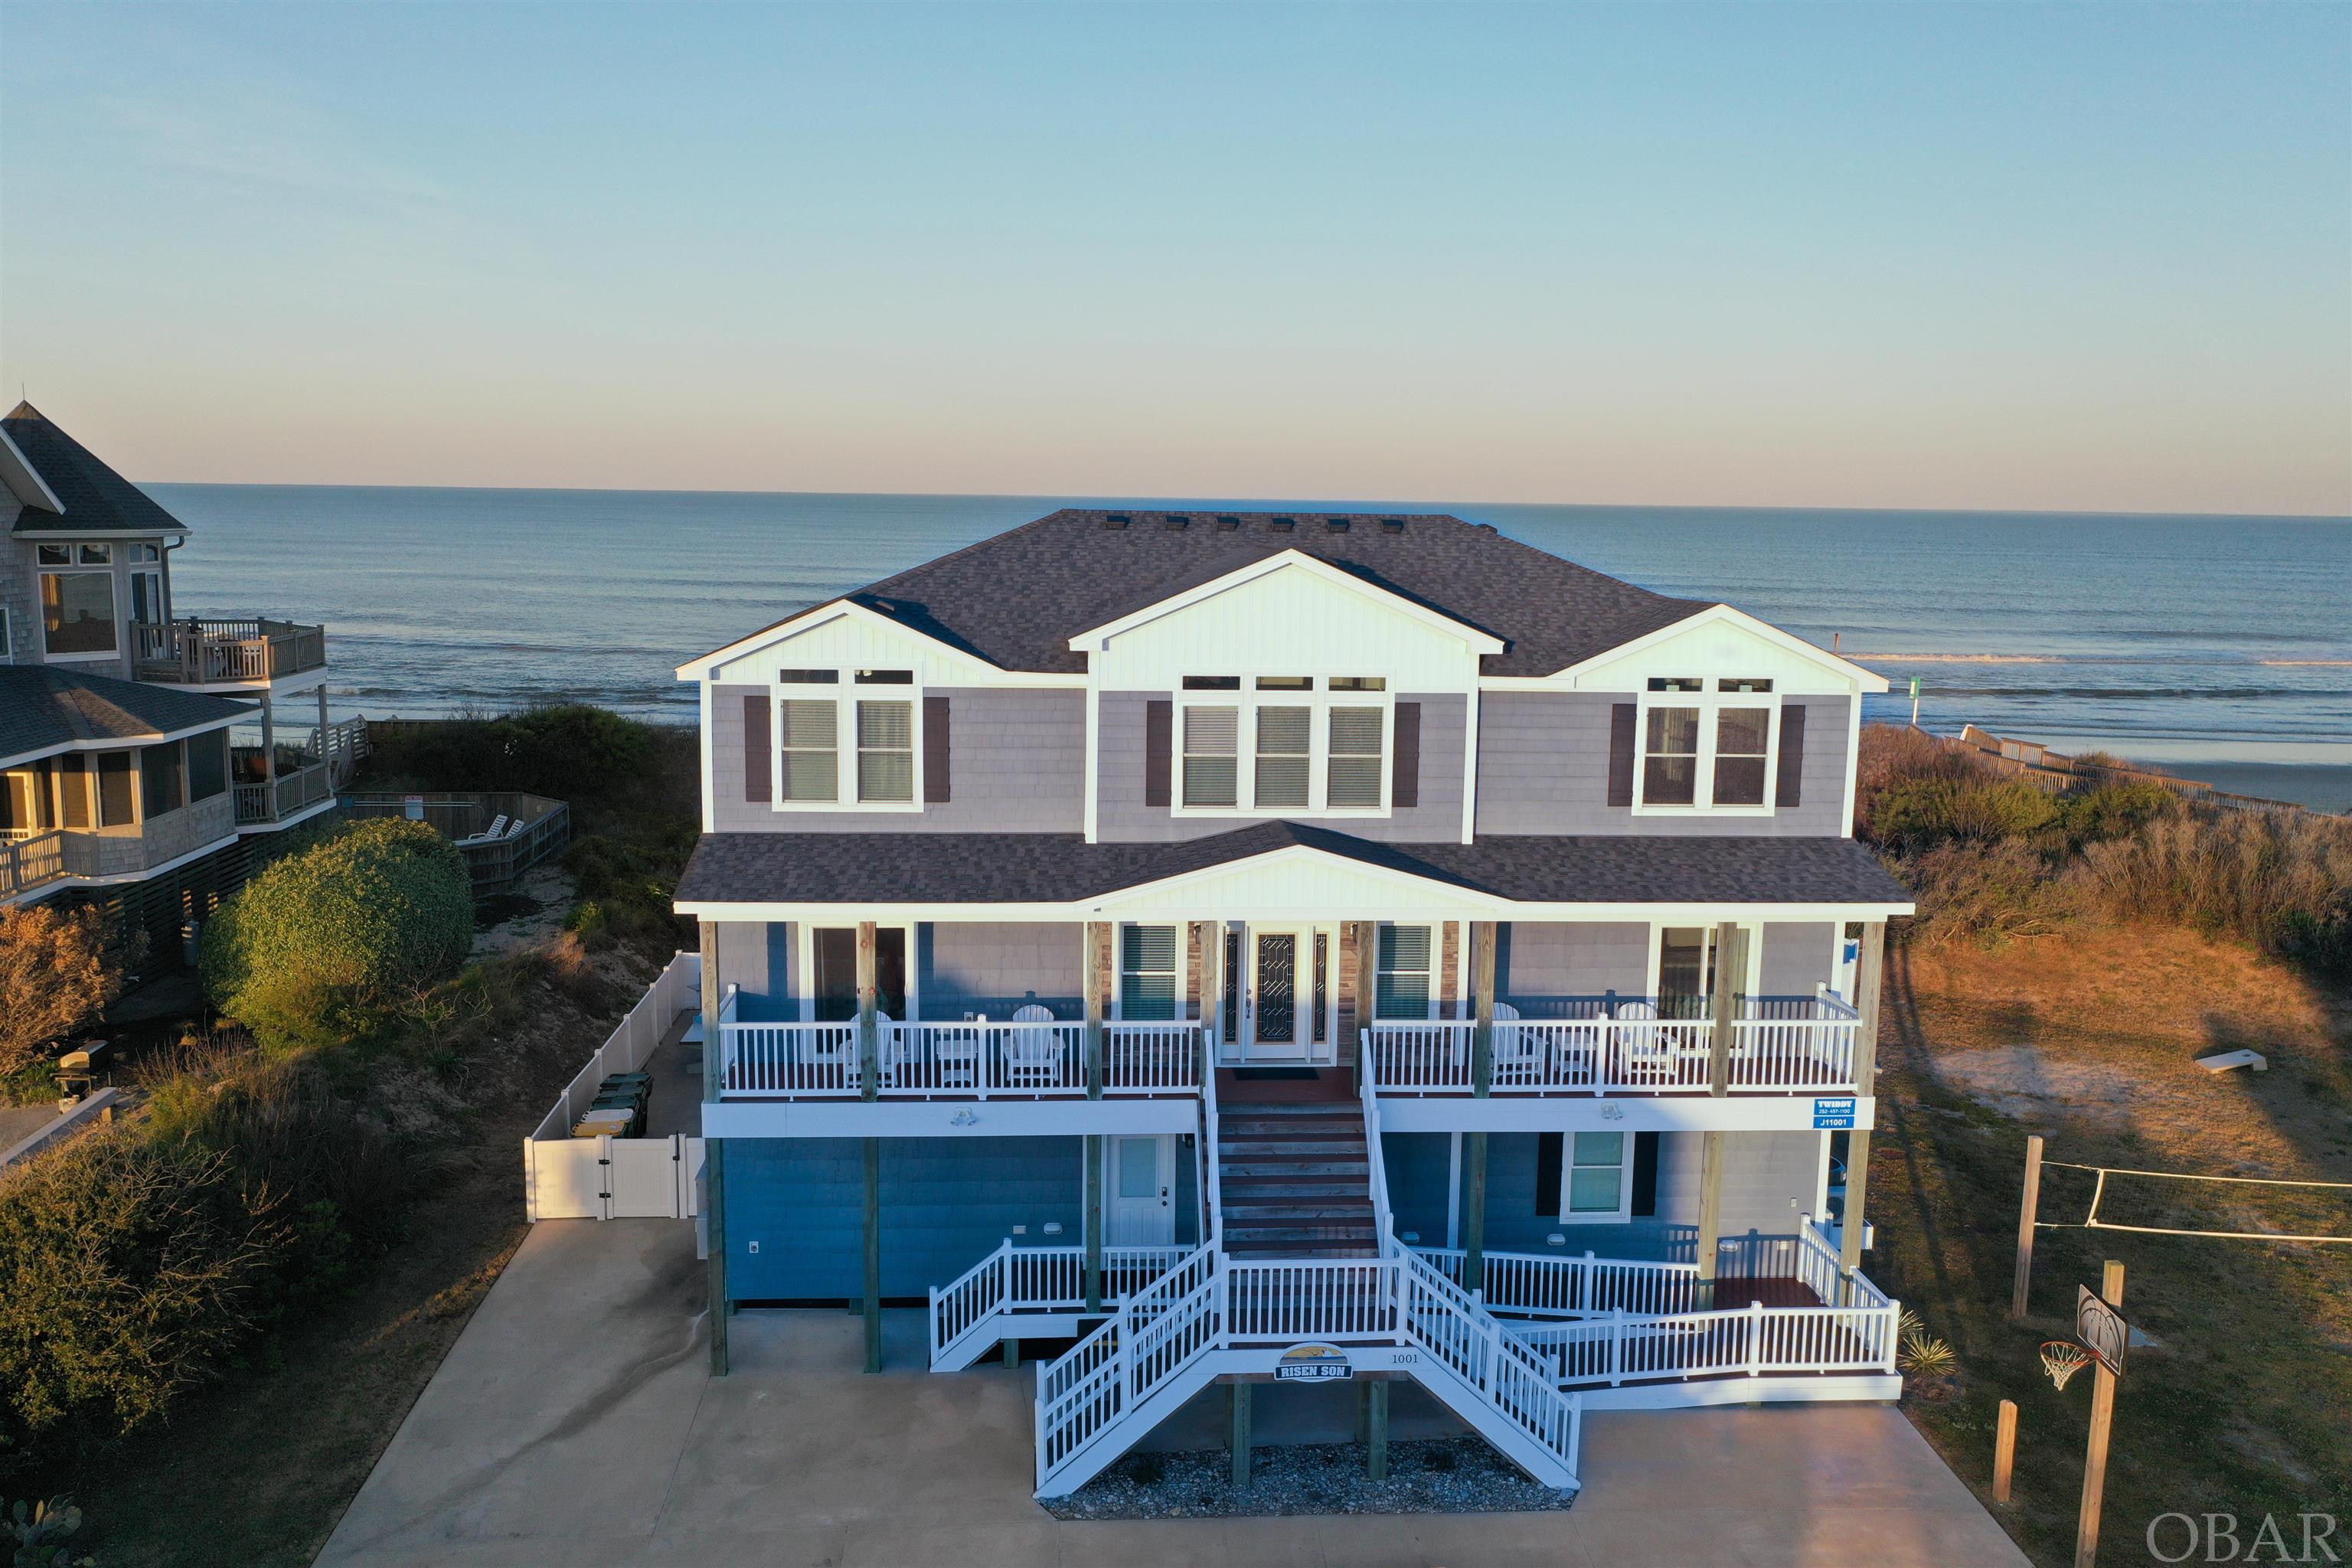 Best time to buy an Investment property is at the beginning of the rental season! This is a money maker, Oceanfront custom built home in the sought after Whalehead Club.  This builder had a design in mind to maximize space while creating a resort-like atmosphere. Owners and guests will enjoy endless Ocean views from the decks.Beautiful sunsets on the west and gorgeous sunrises from the east ,paradise!Easy access to all floors with the elevator. This can be a great destination beachfront home for all occasions. Easy walk through to the beach on the newly redone dune deck. Engaging outside amenities including heated saltwater pool with waterfall, recently added concrete ping pong table, foosball and corn hole Boards, a volleyball court and basketball hoop. No need to go inside when the Pool cabana includes a kitchen area with refrigerator, gas grill, Built to last furniture, TV, Stereo, bar and 1/2 bath with an outside shower. 11 suites all including their own bathrooms. This reverse floor plan has 3 Levels of living featuring a game room, theater and workout room on the first floor. A living room on the second floor. The 3rd floor is a Gourmet Kitchen with 2 double oven ranges, 2 dishwashers, 2 refrigerators , 50# ice maker and breakfast bar. The dining area consists of 2 large tables overlooking the ocean. This destination home was built for rentals with commercial grade LVP and carpet, 50 year landmark pro shingle with a zip roof underneath. Trex decking and upgraded shake siding no detail was overlooked fasteners all  stainless steel.This location allows easy access to restaurants, stores and the many activities in the area. Or Enjoy your personal paradise. Rental projections on file.This one of the top performing homes in Whalehead! Come visit The Risen Son today. Add to your Investment  portfolio.   Great investment excellent location! Call to see!